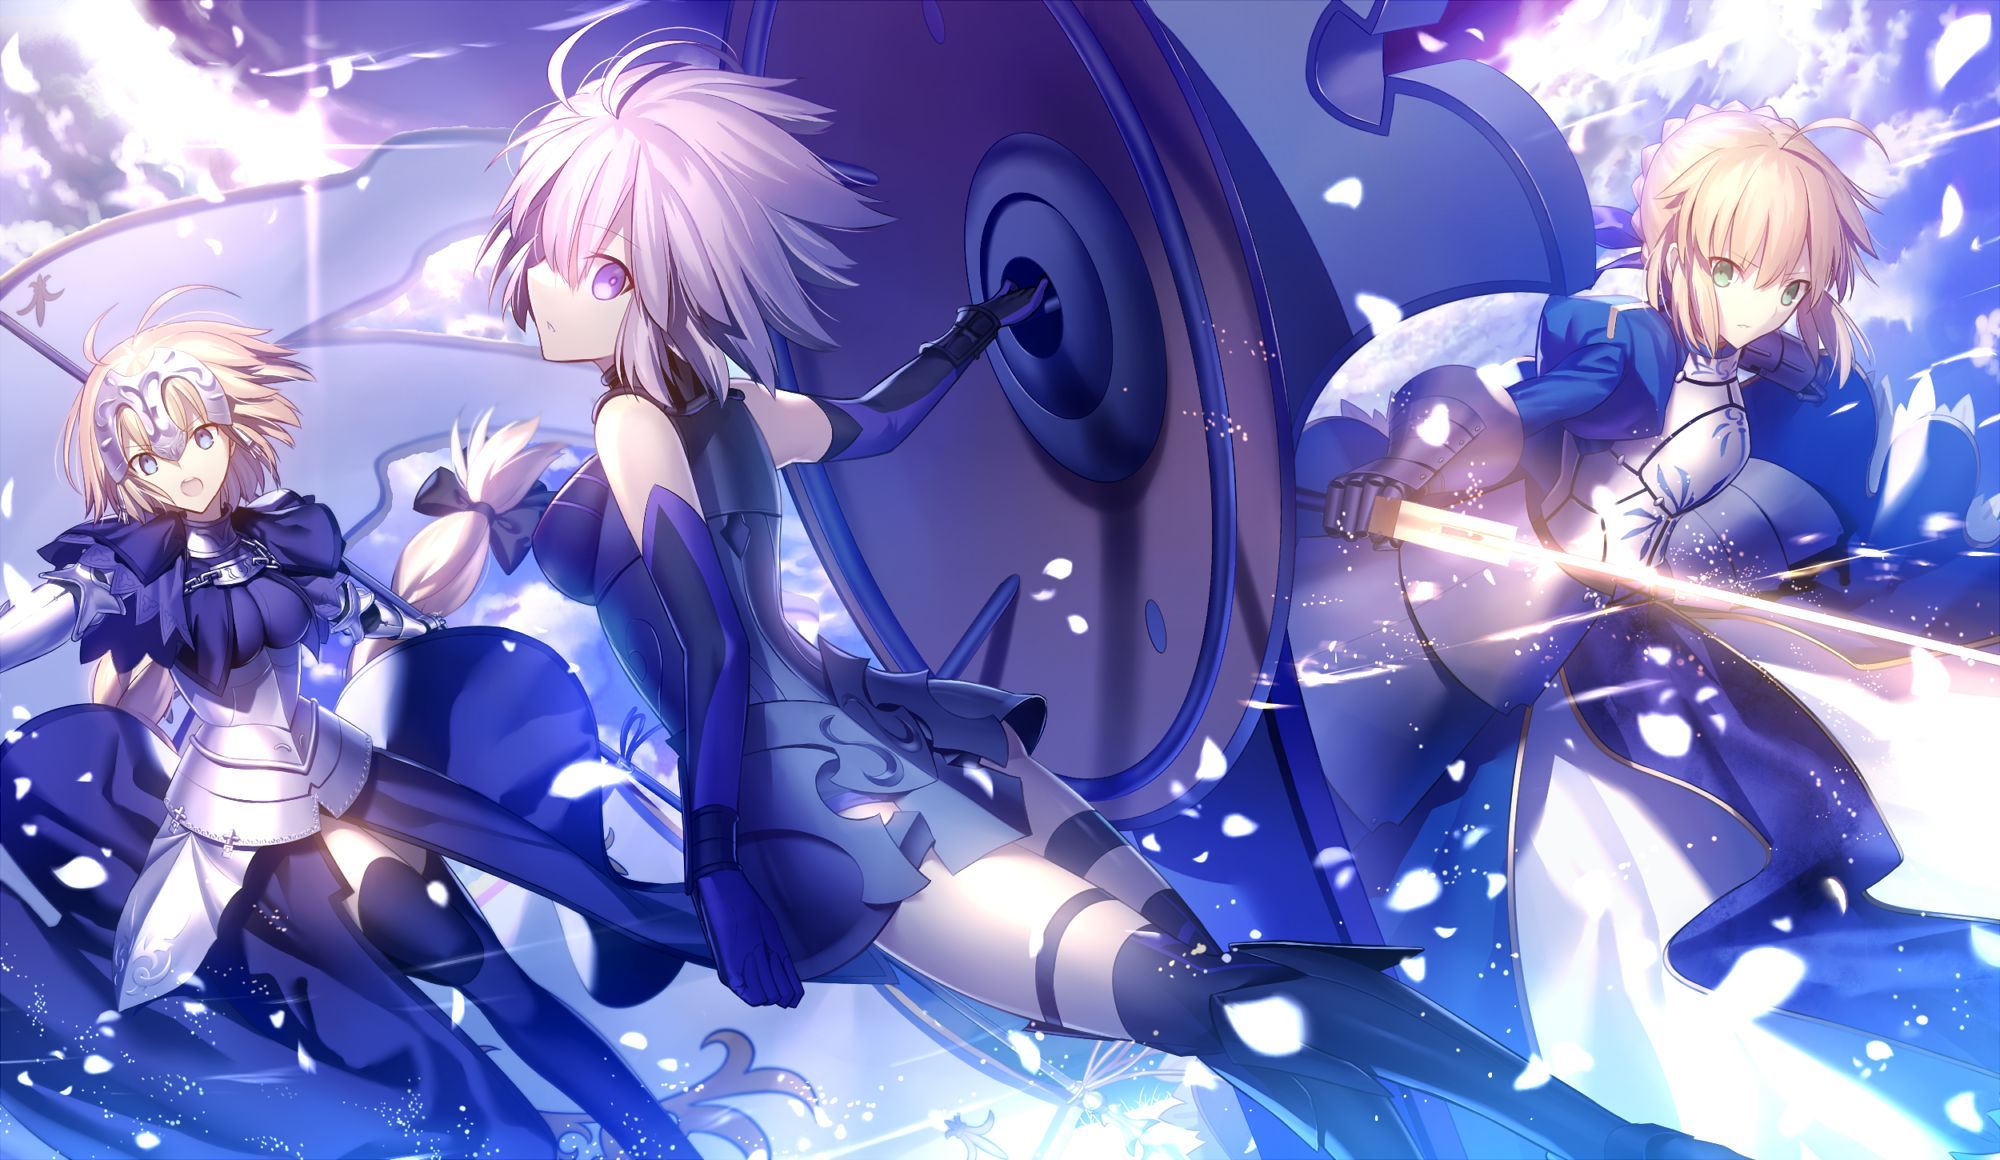 Fate Series Wallpapers For Desktop Download Free Fate Series Pictures And Backgrounds For Pc 1149